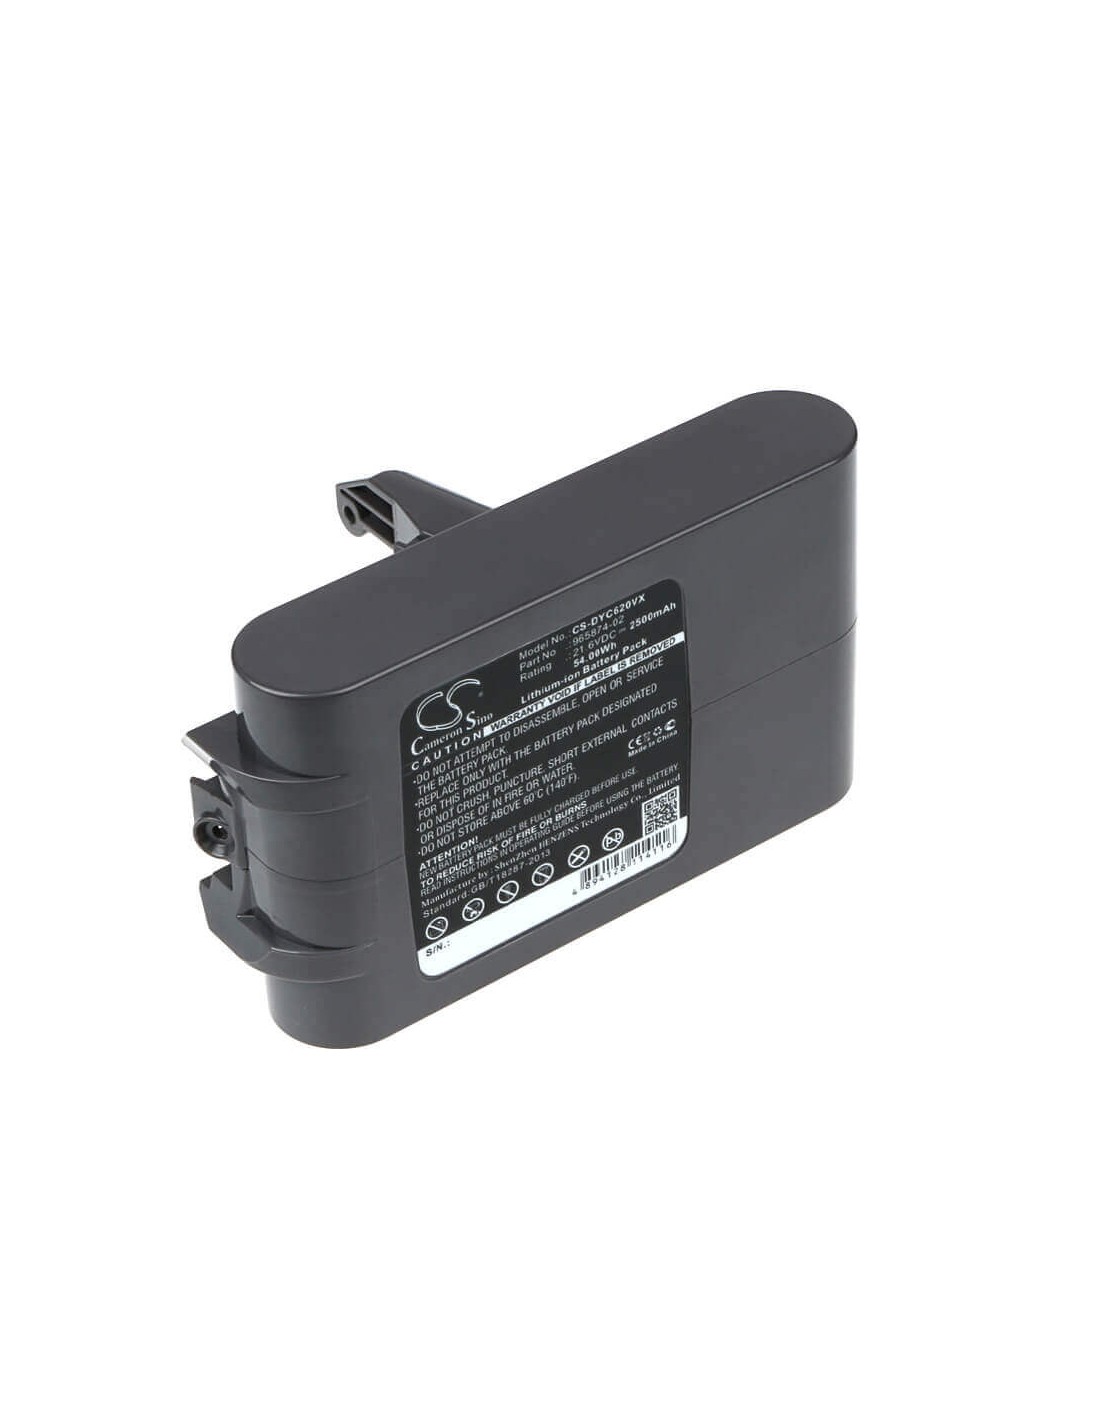 High Capacity Battery for Dyson DC72 Animal, Dc61, Dc62, Dc58 21.6V, 2500mAh - 54.00Wh